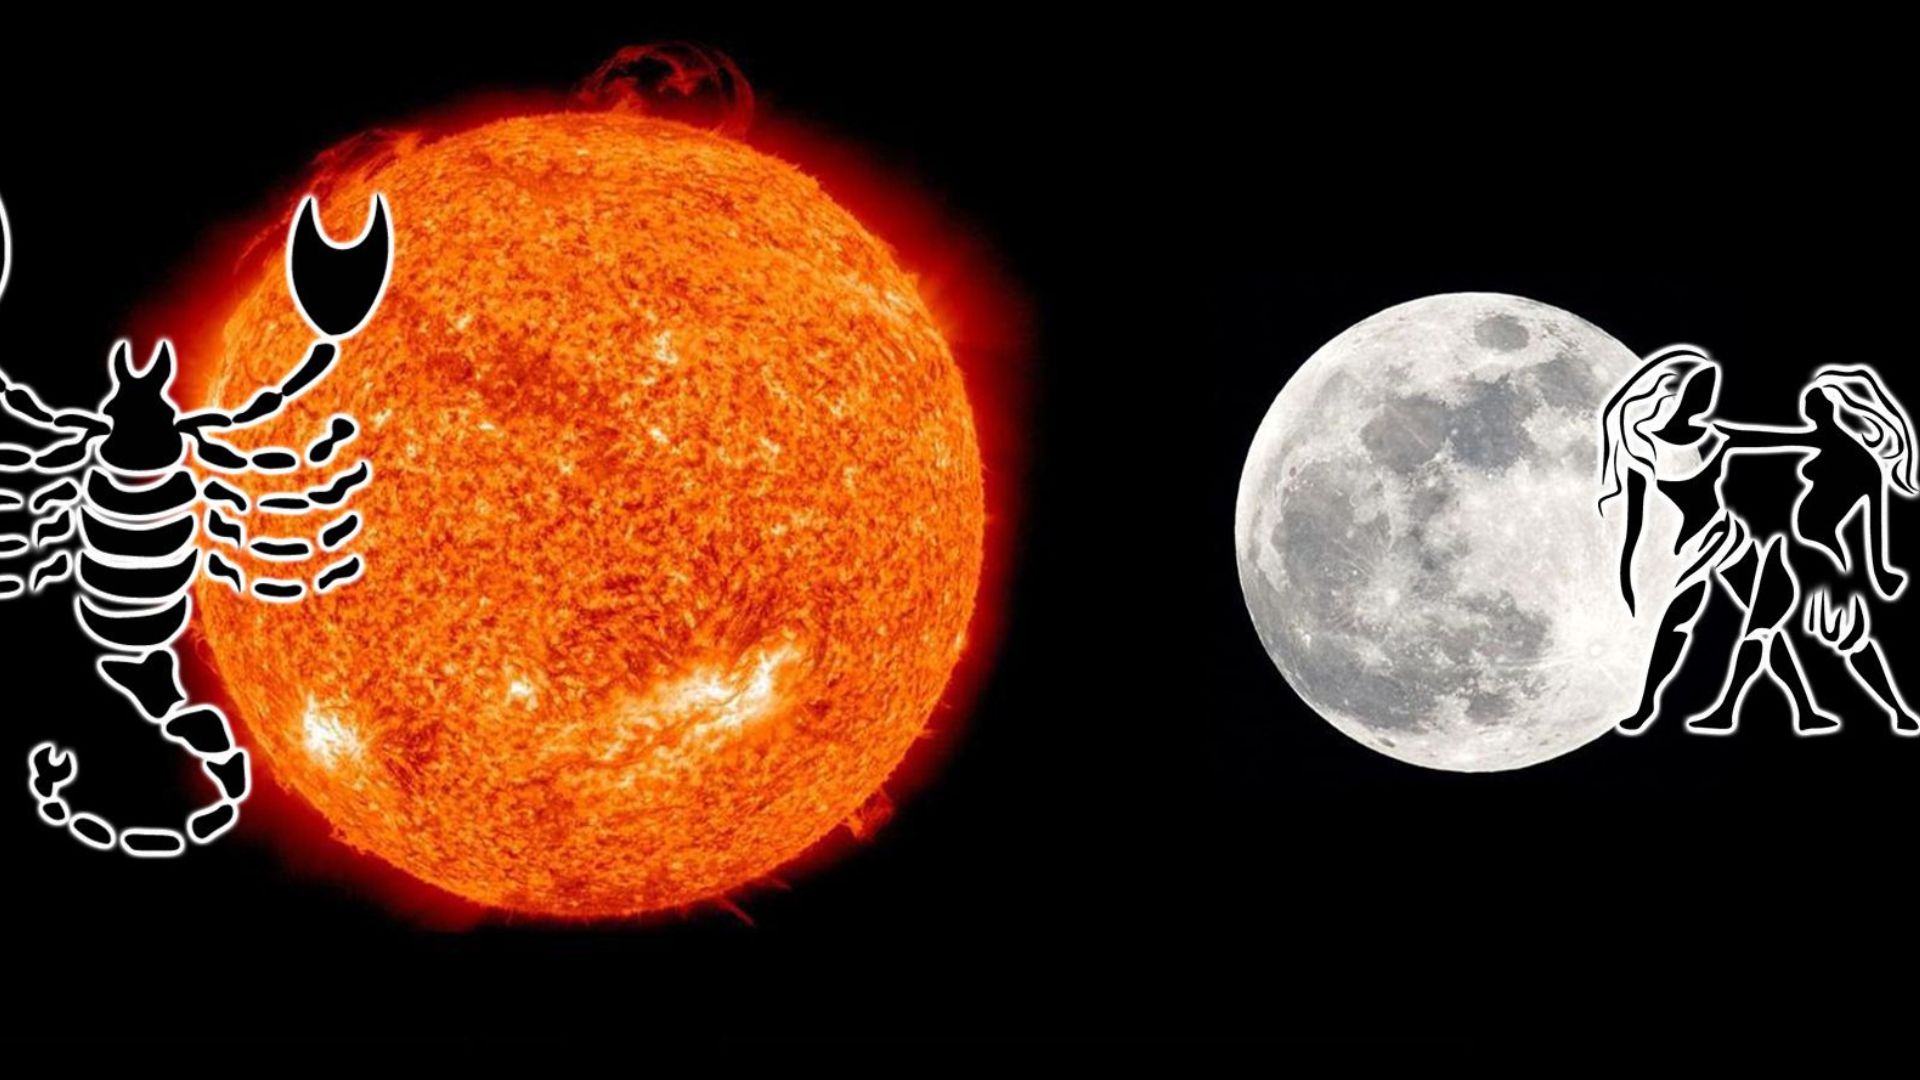 Different Symbols Next to sun and moon